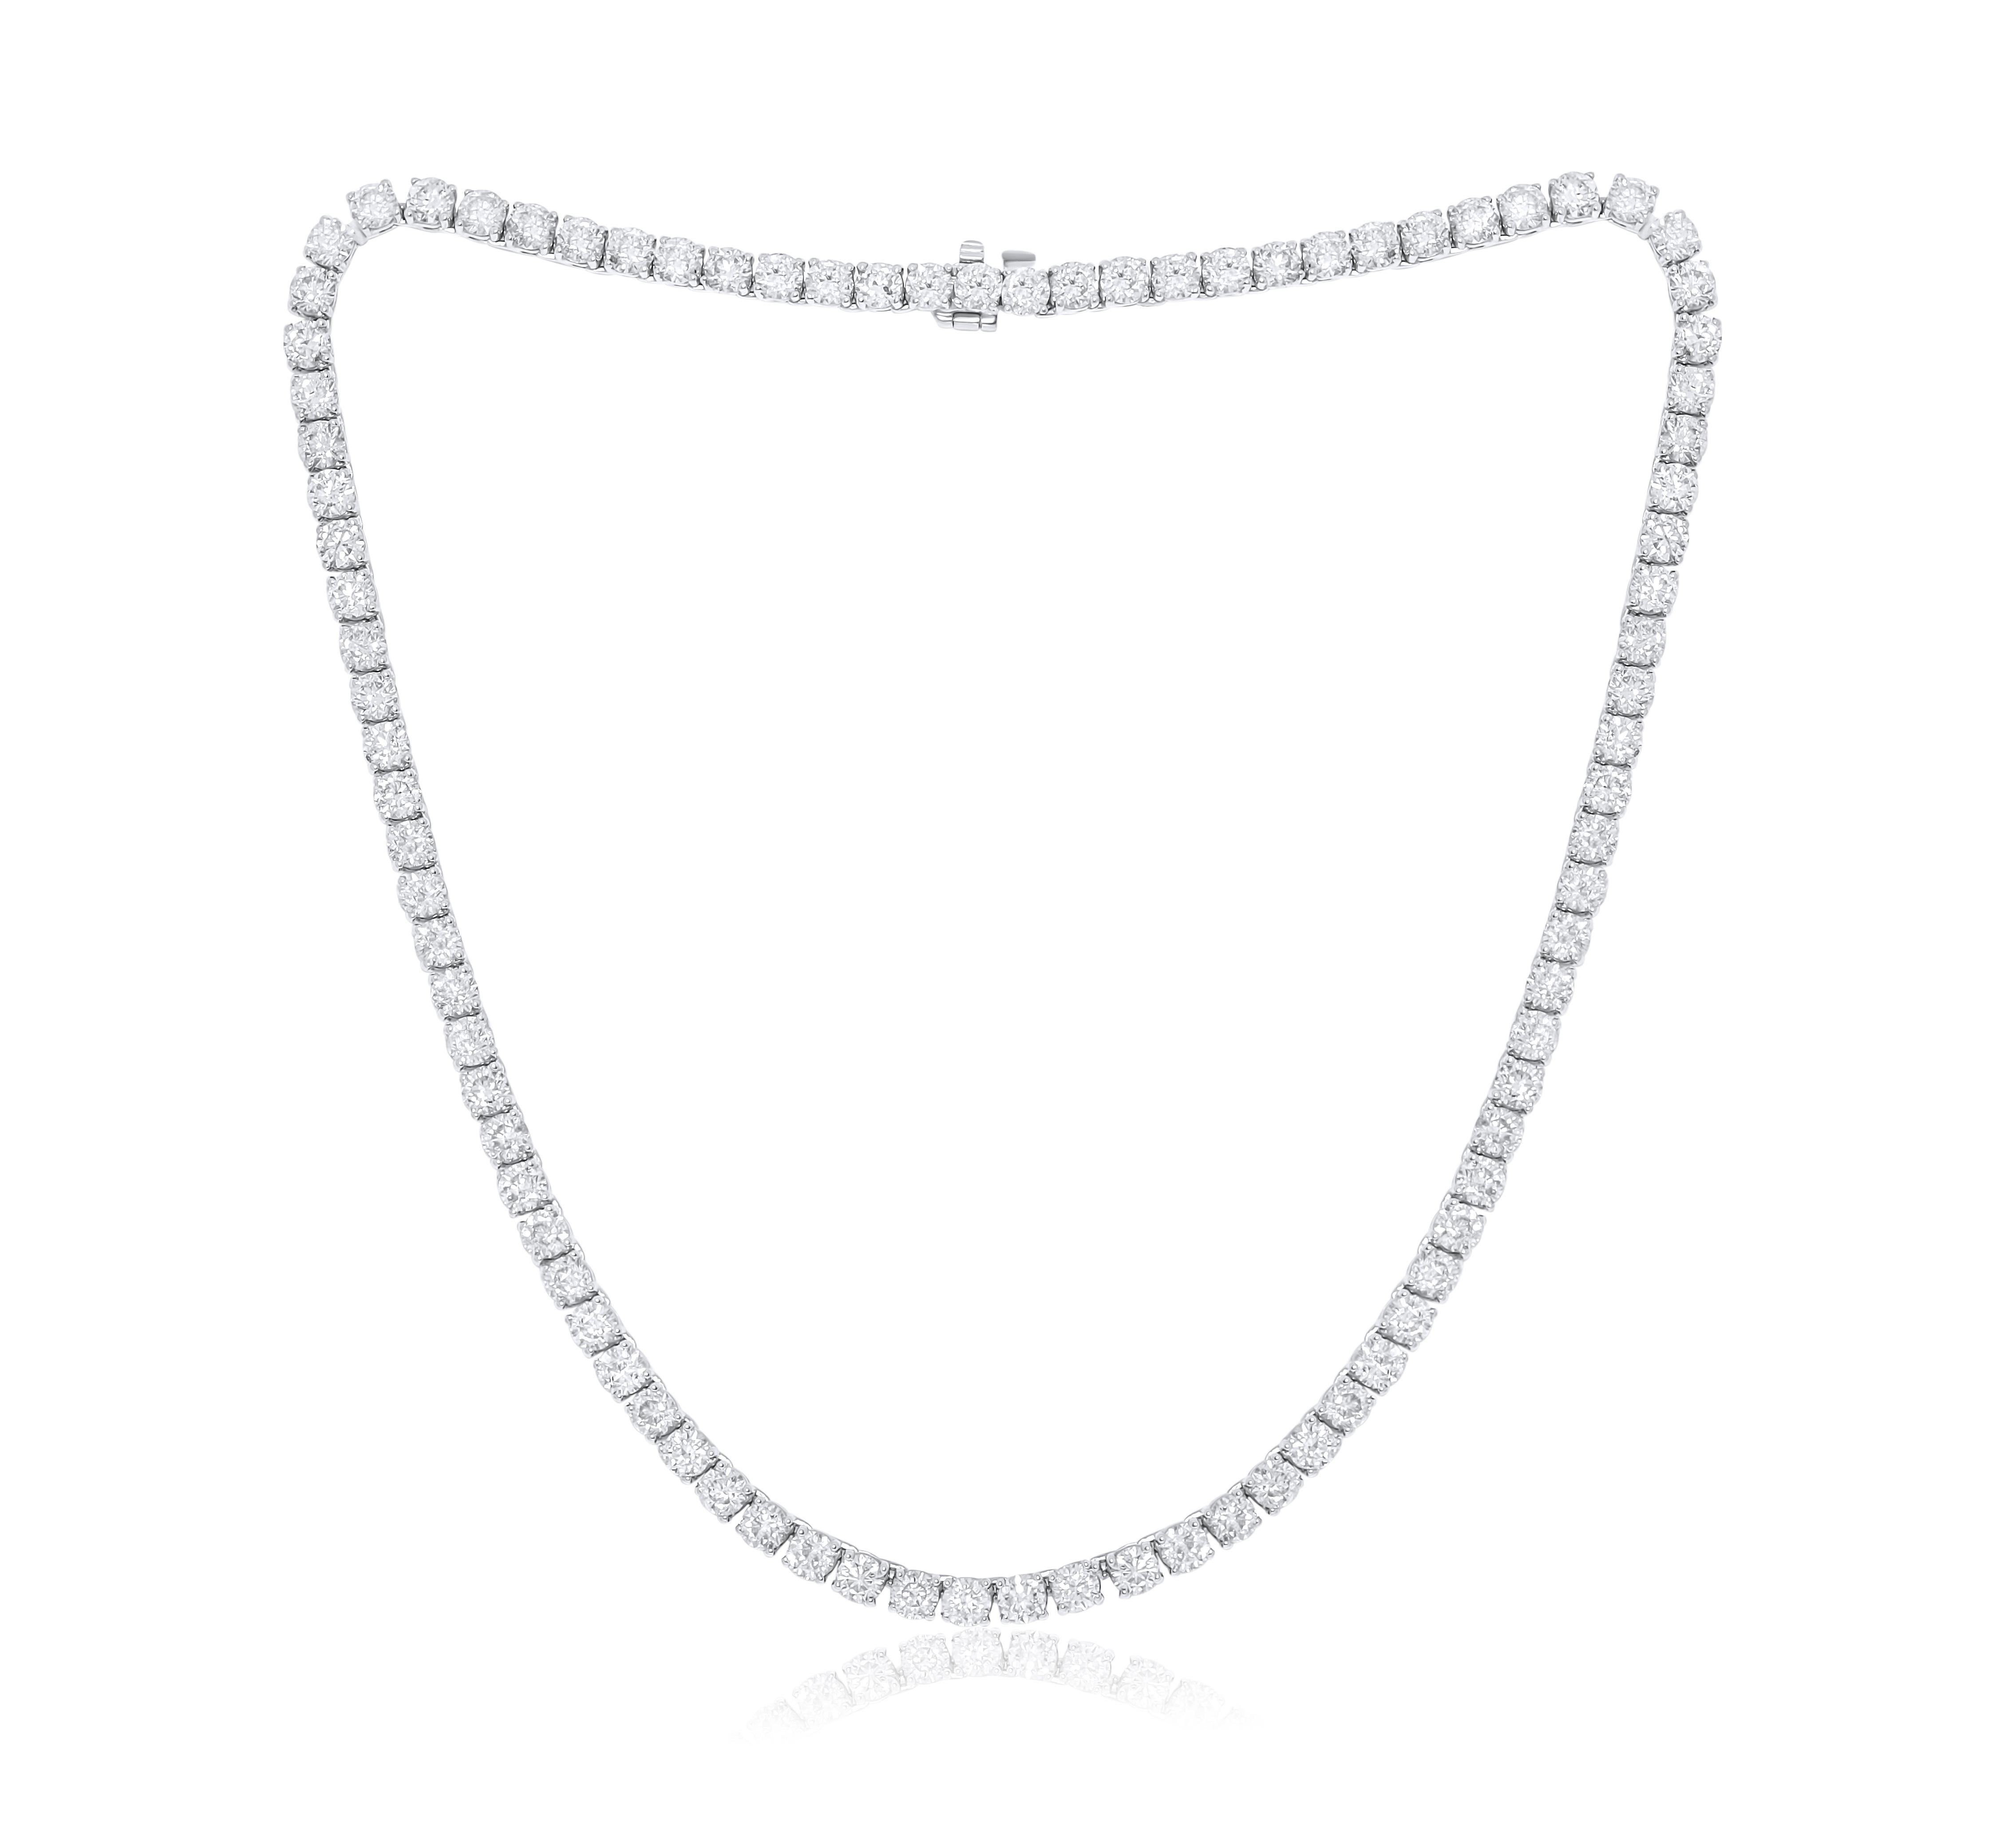 Custom 14k White gold 4 prong diamond tennis necklace a 28.50 cts round diamonds 90 stones 0.31 each.Color FG SI clarity. Excellent cut.
